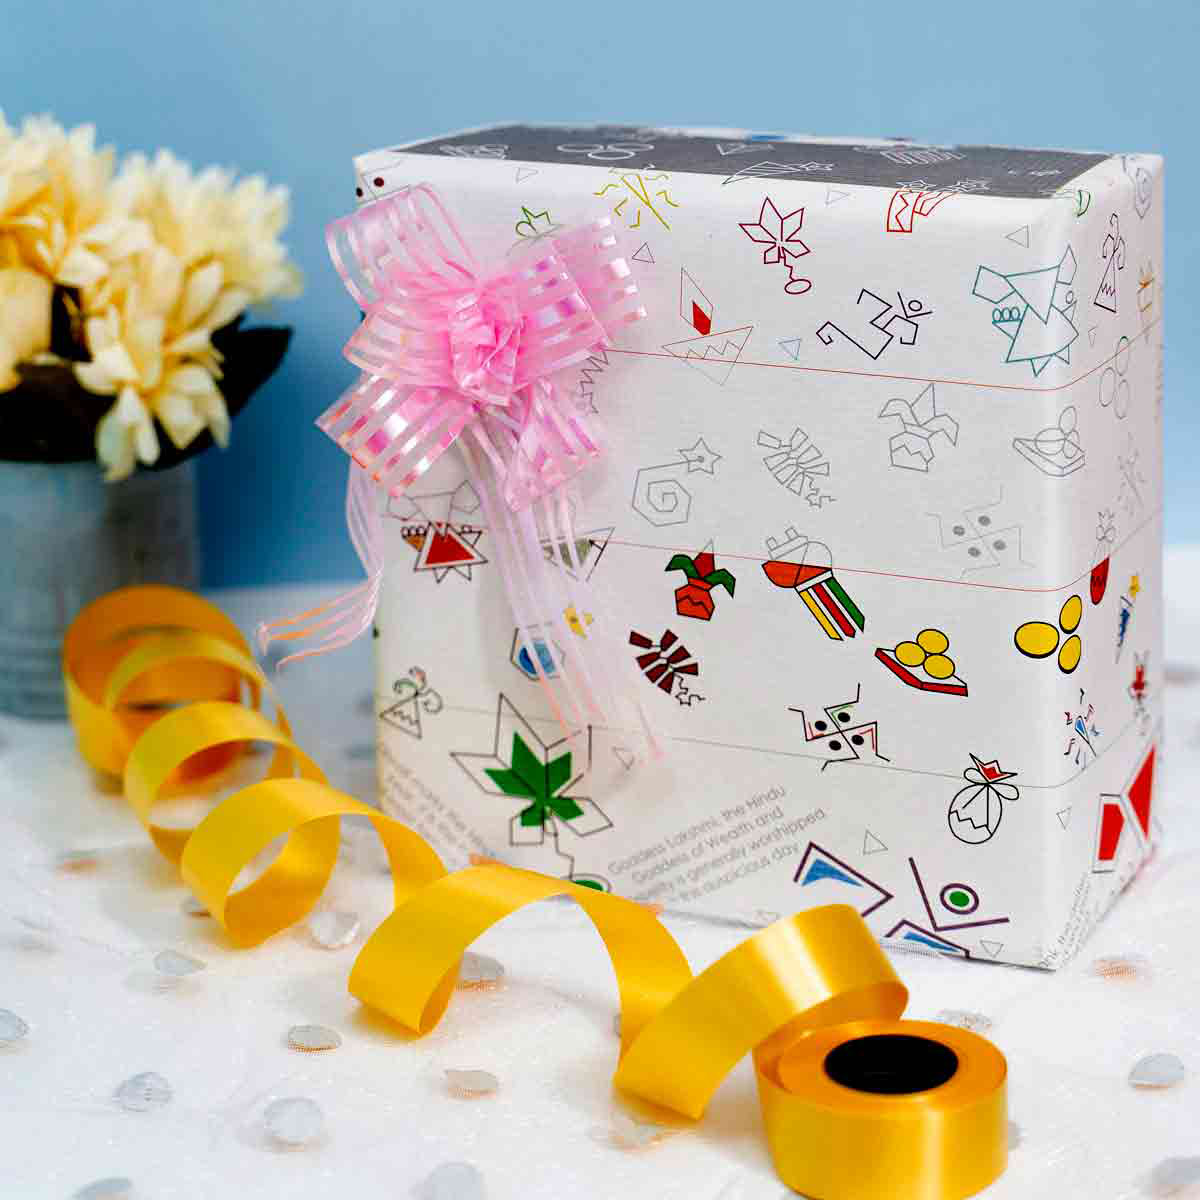 Diwali Doodle Gift Wrapping Paper with Facts: Add Some Charm with Doodles and Facts